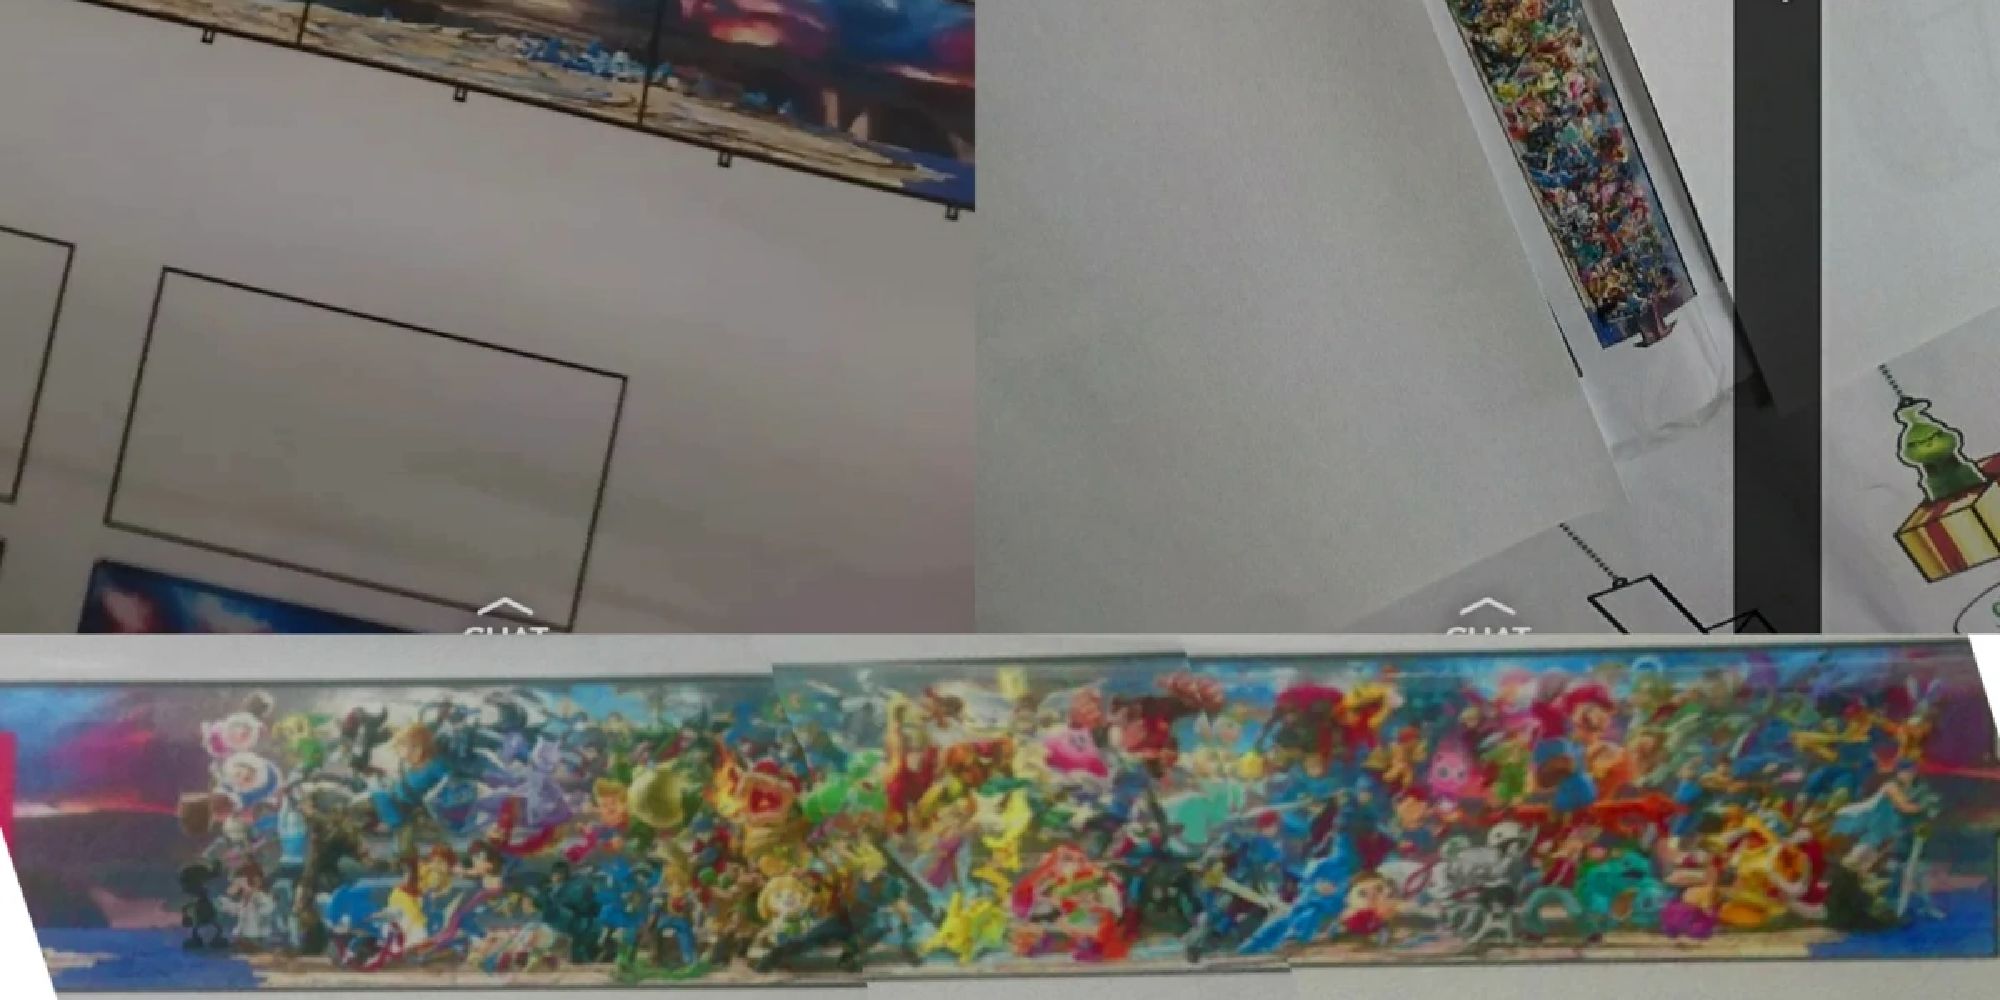 A section of the Grinch leak for SSBU showing the alleged completed banner